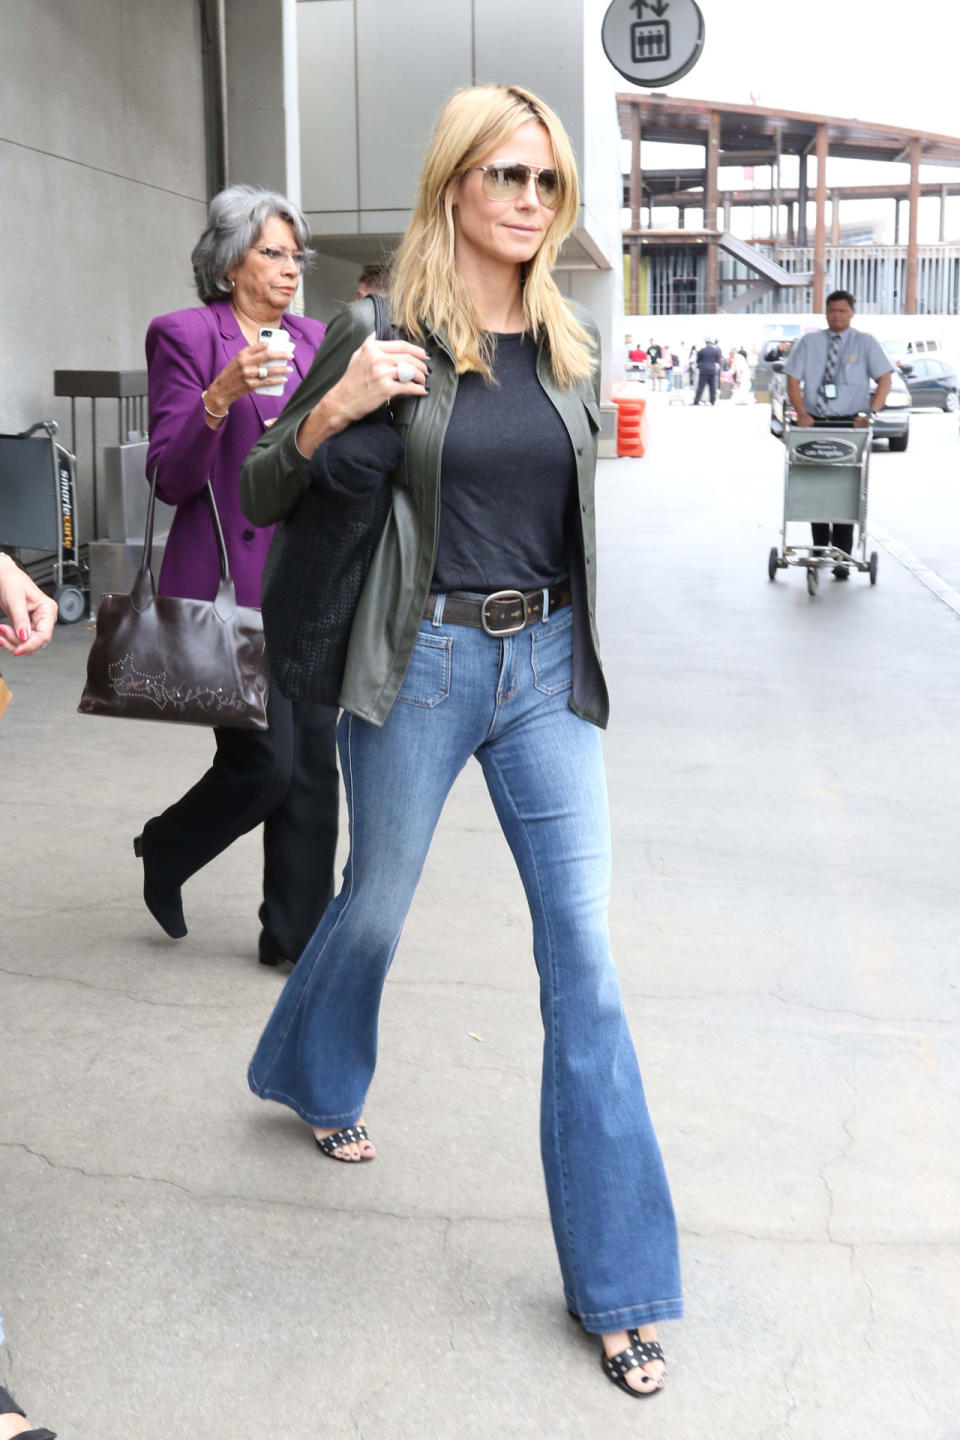 Heidi Klum in high-waist flared jeans and a fitted black tee.